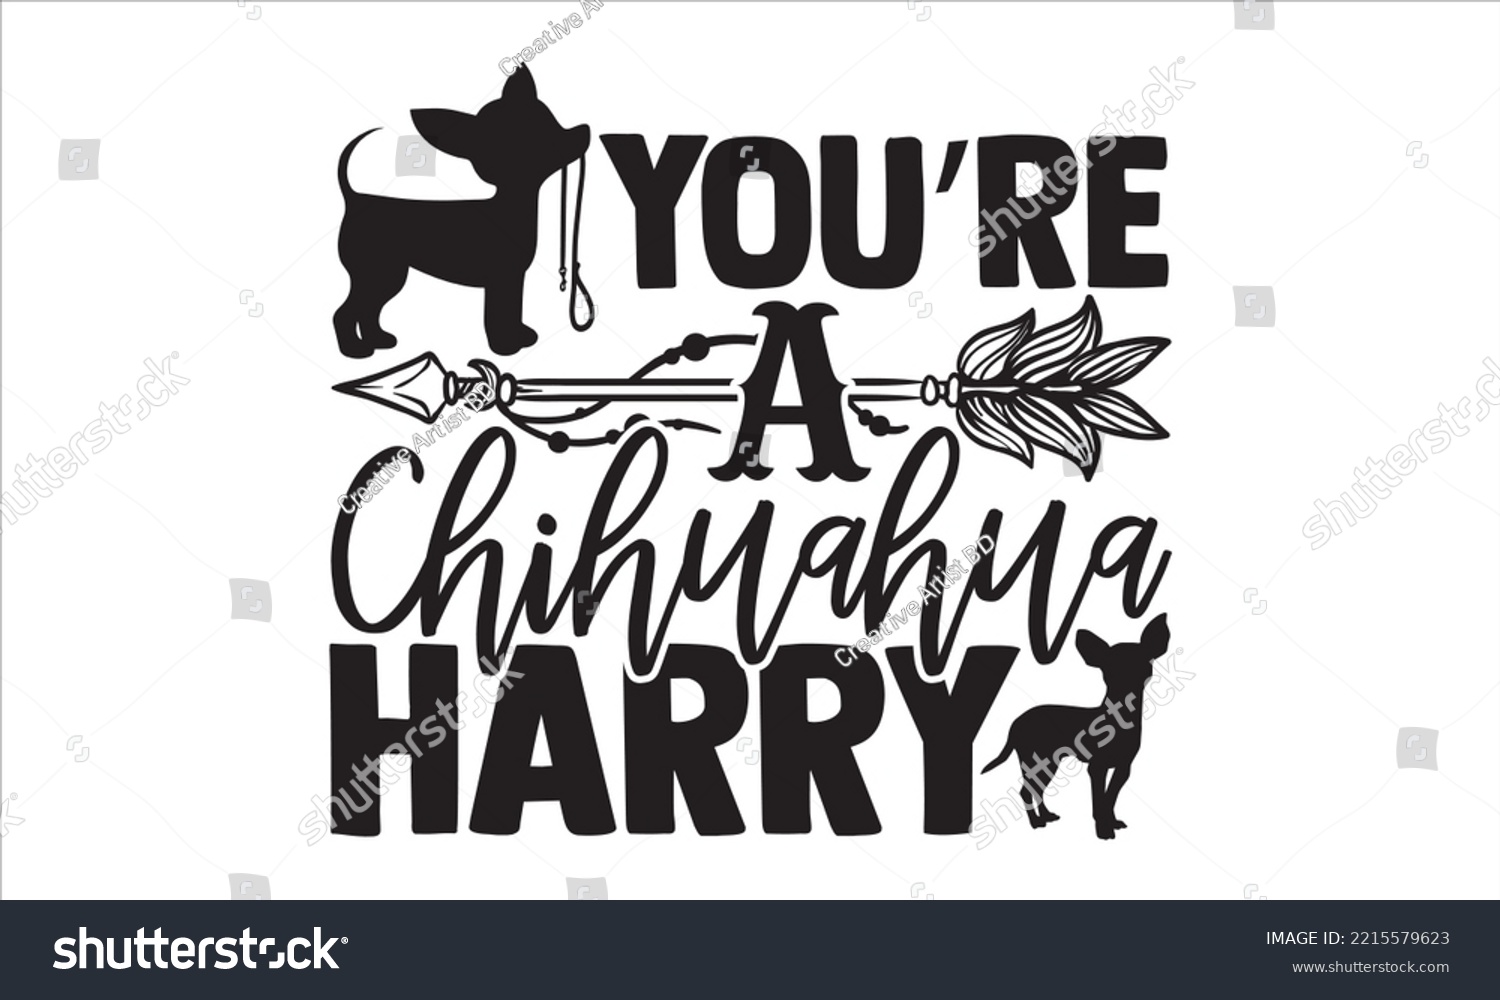 SVG of You’re A Chihuahua Harry - Chihuahua T shirt Design, Hand drawn vintage illustration with hand-lettering and decoration elements, Cut Files for Cricut Svg, Digital Download svg